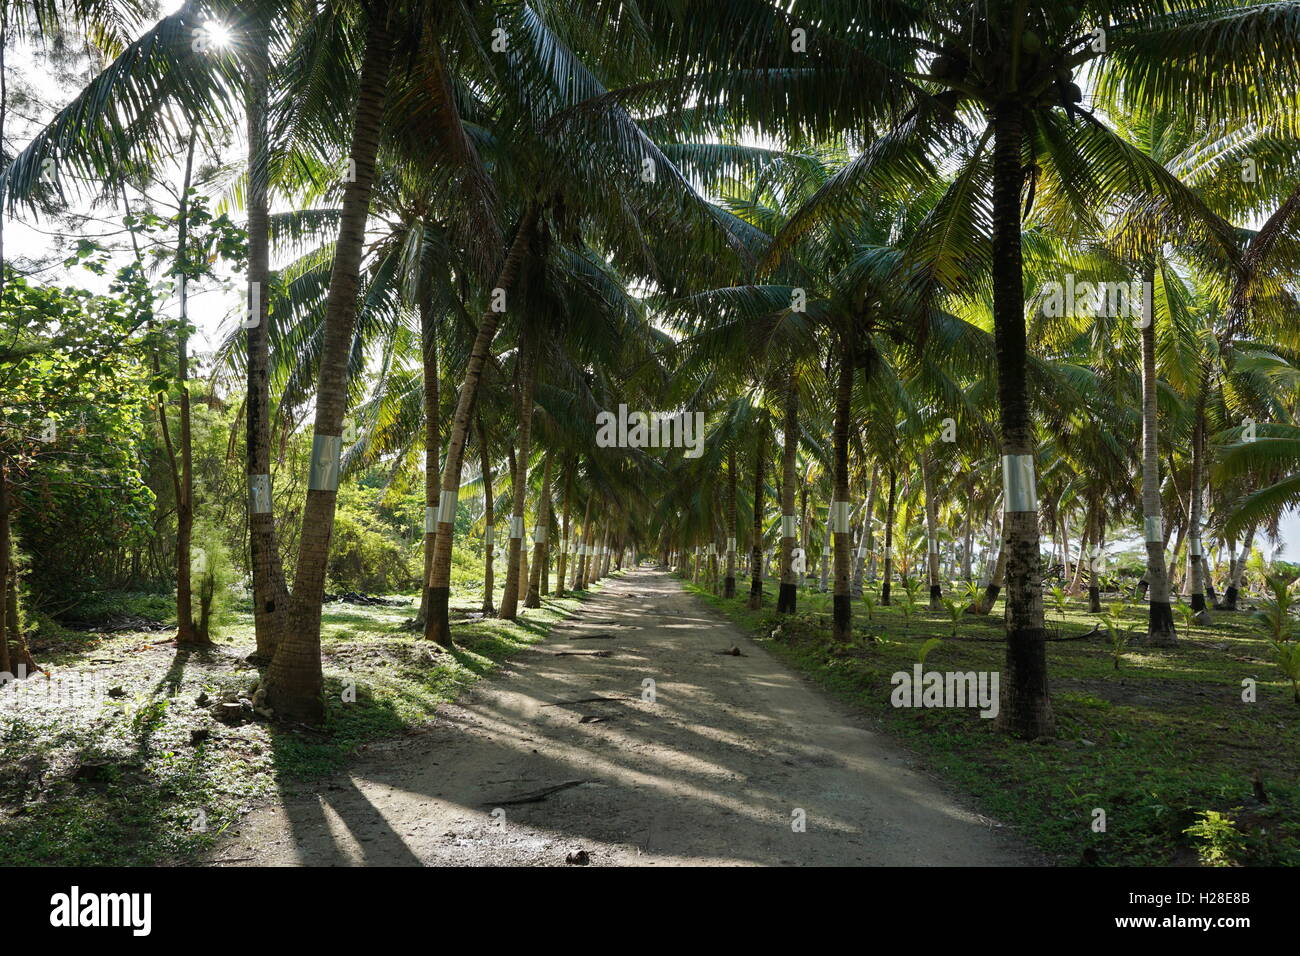 Shaded track lined by coconut palm trees on the north of Huahine Nui island, Maeva, French Polynesia Stock Photo